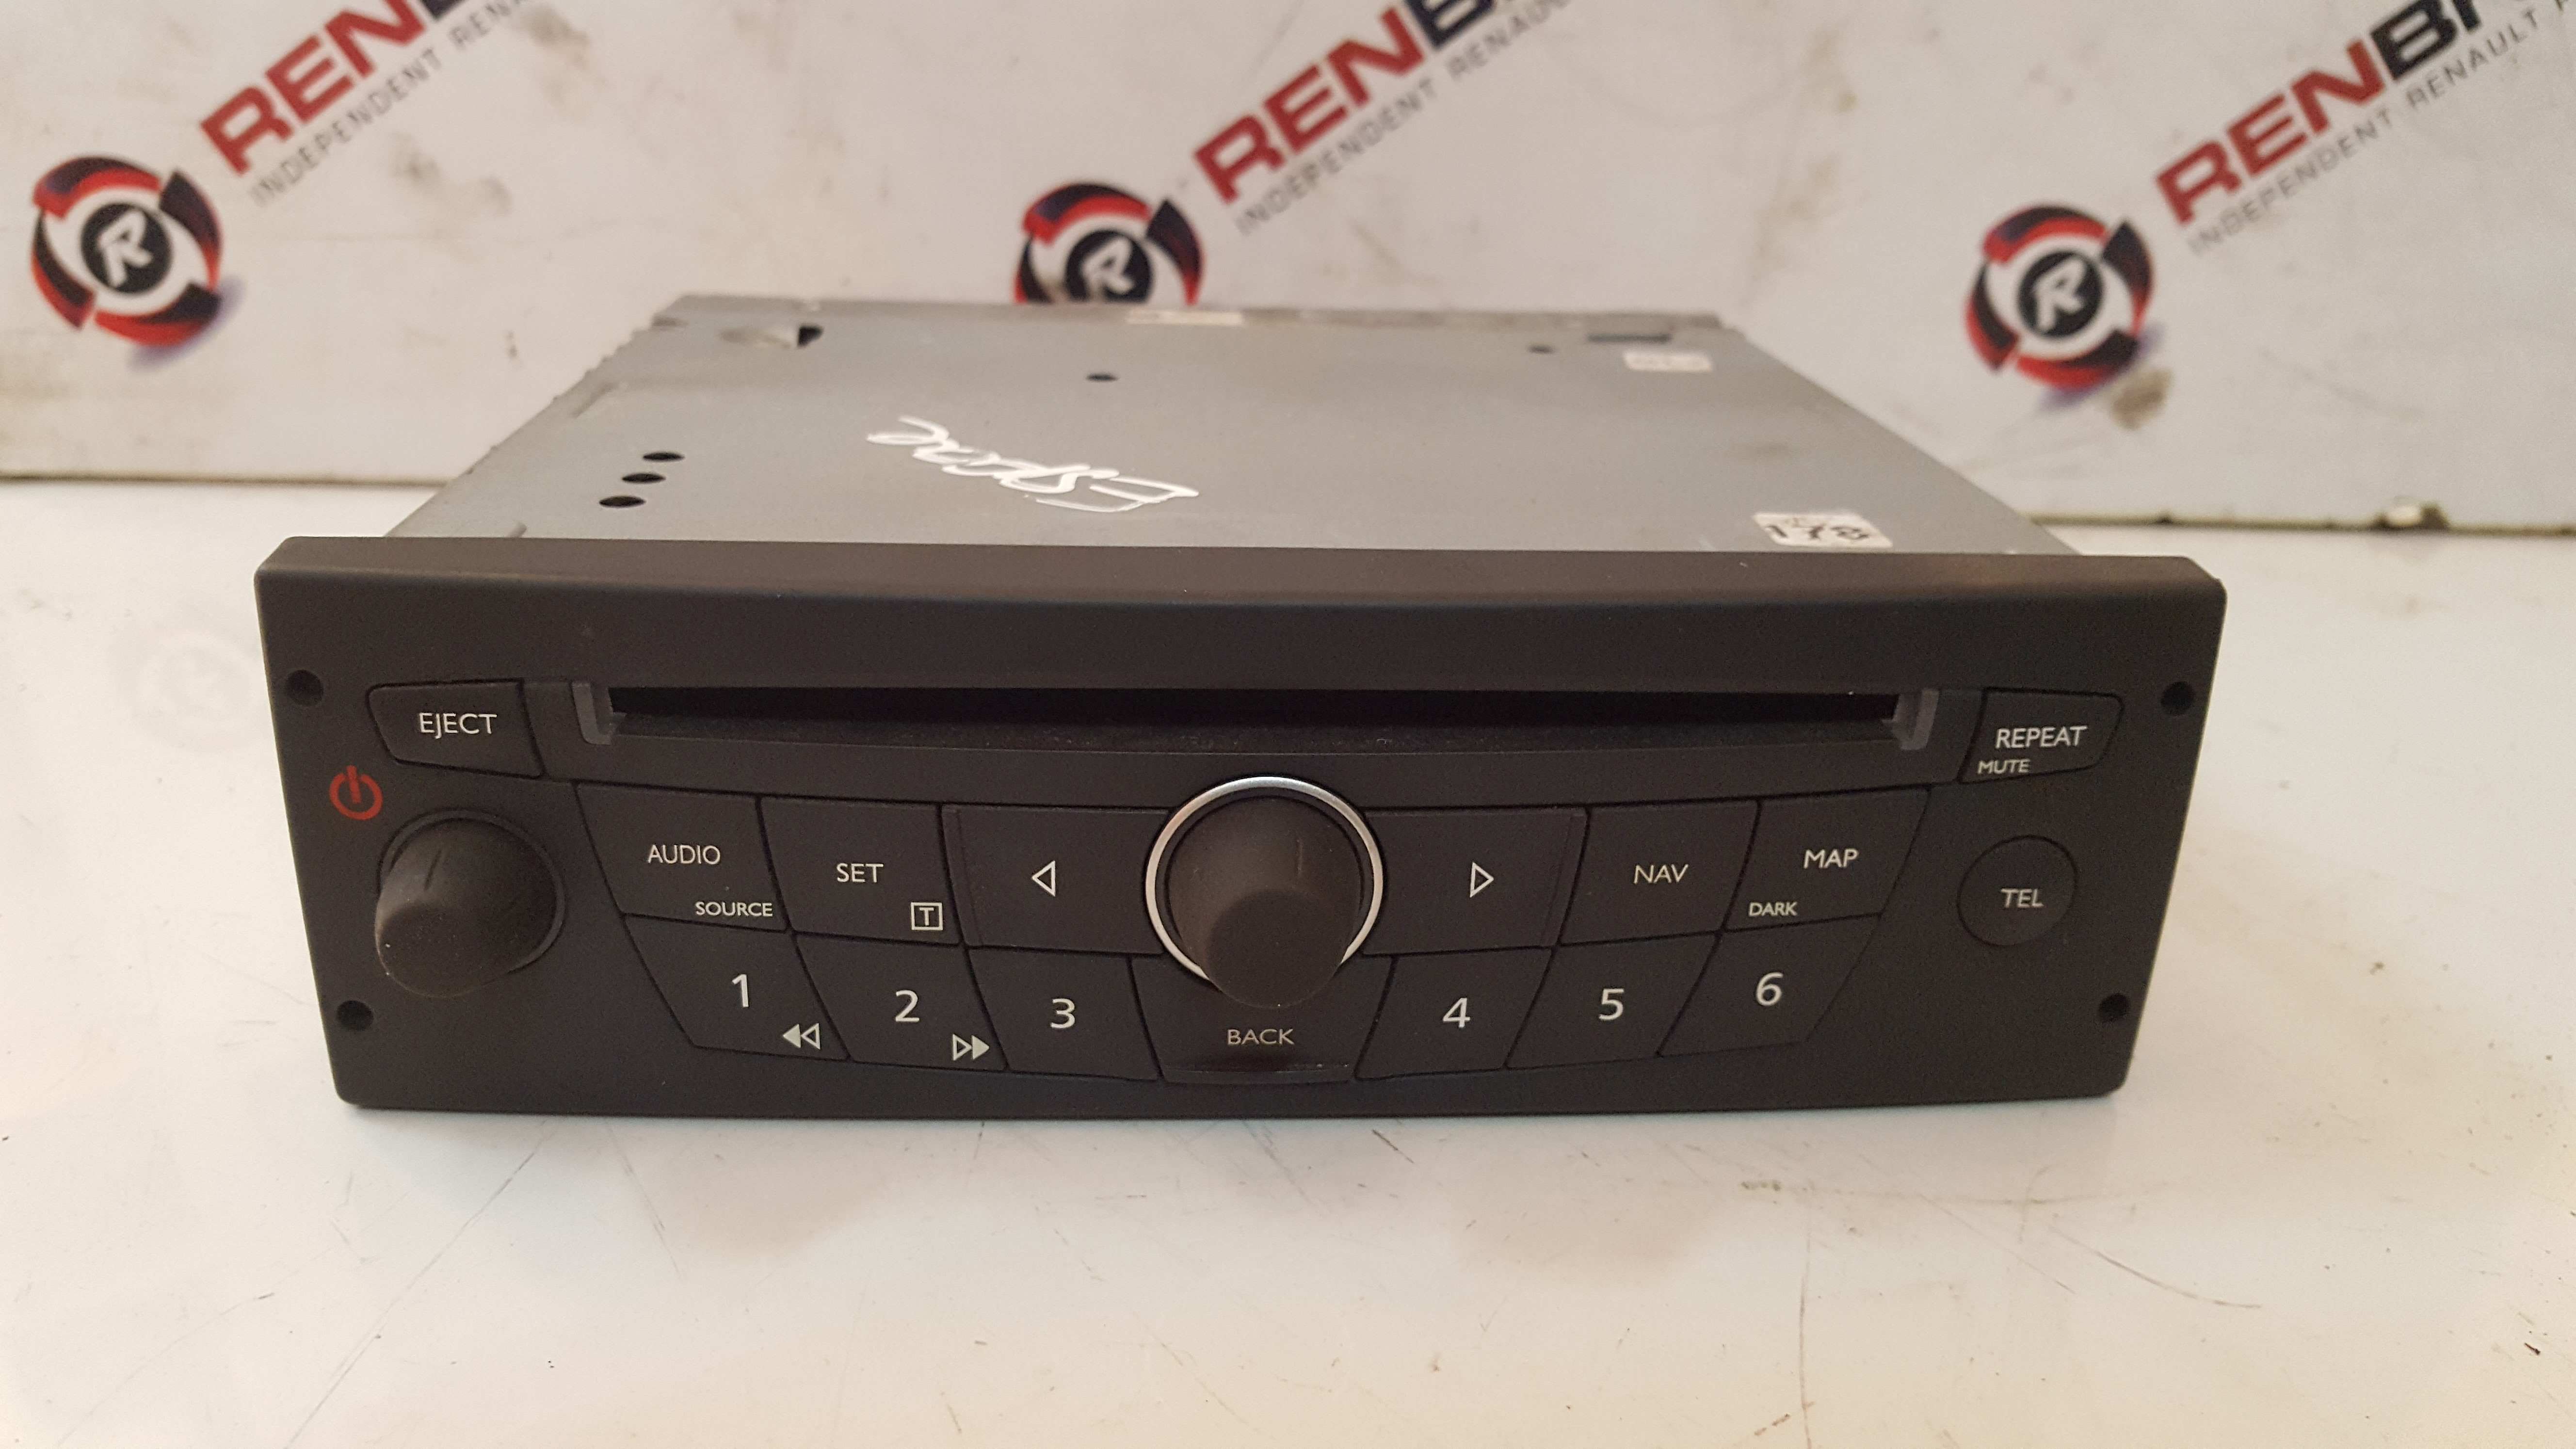 Renault Trafic 2001-2006 Radio Cd Player Tuner List - Store - Renault  Breakers - Used Renault Car Parts & Spares Specialist